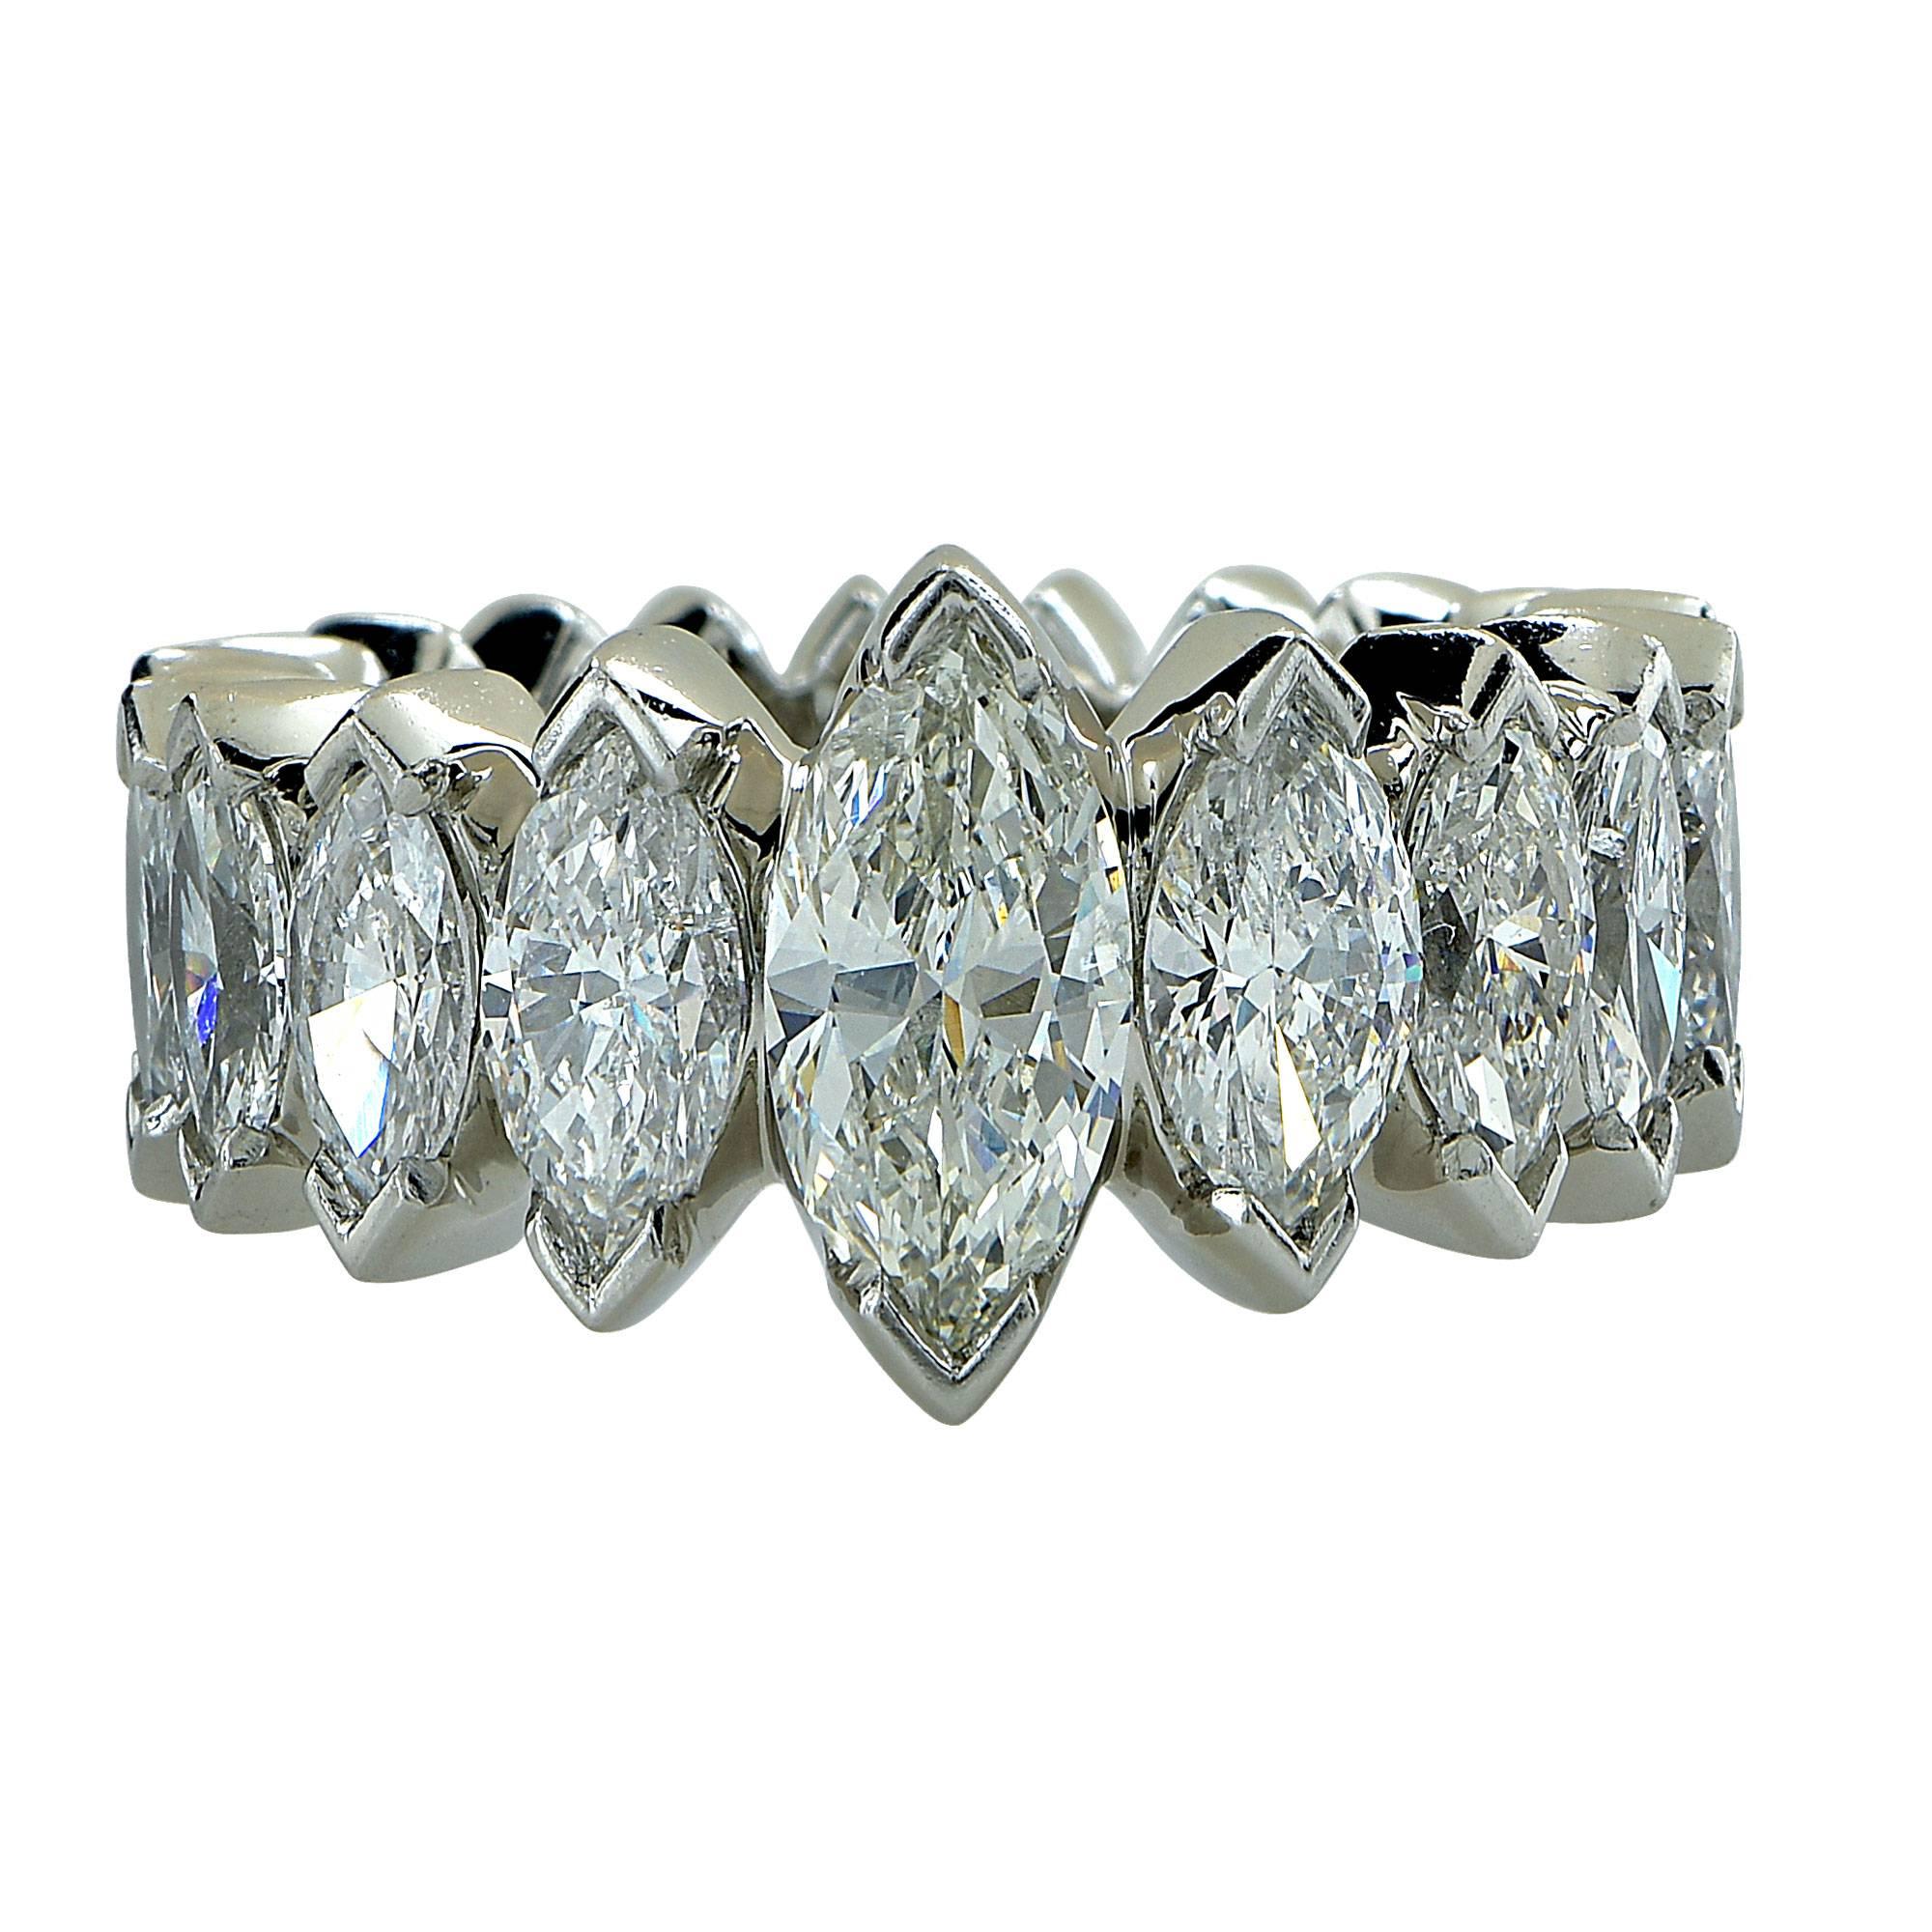 Platinum eternity band featuring 20 marquise cut diamonds weighing approximately 5.40cts total, G-H color, VS-SI clarity.

Ring size: 5 (can not be sized up or down)
Metal weight: 13.99 grams

This diamond eternity band is accompanied by a